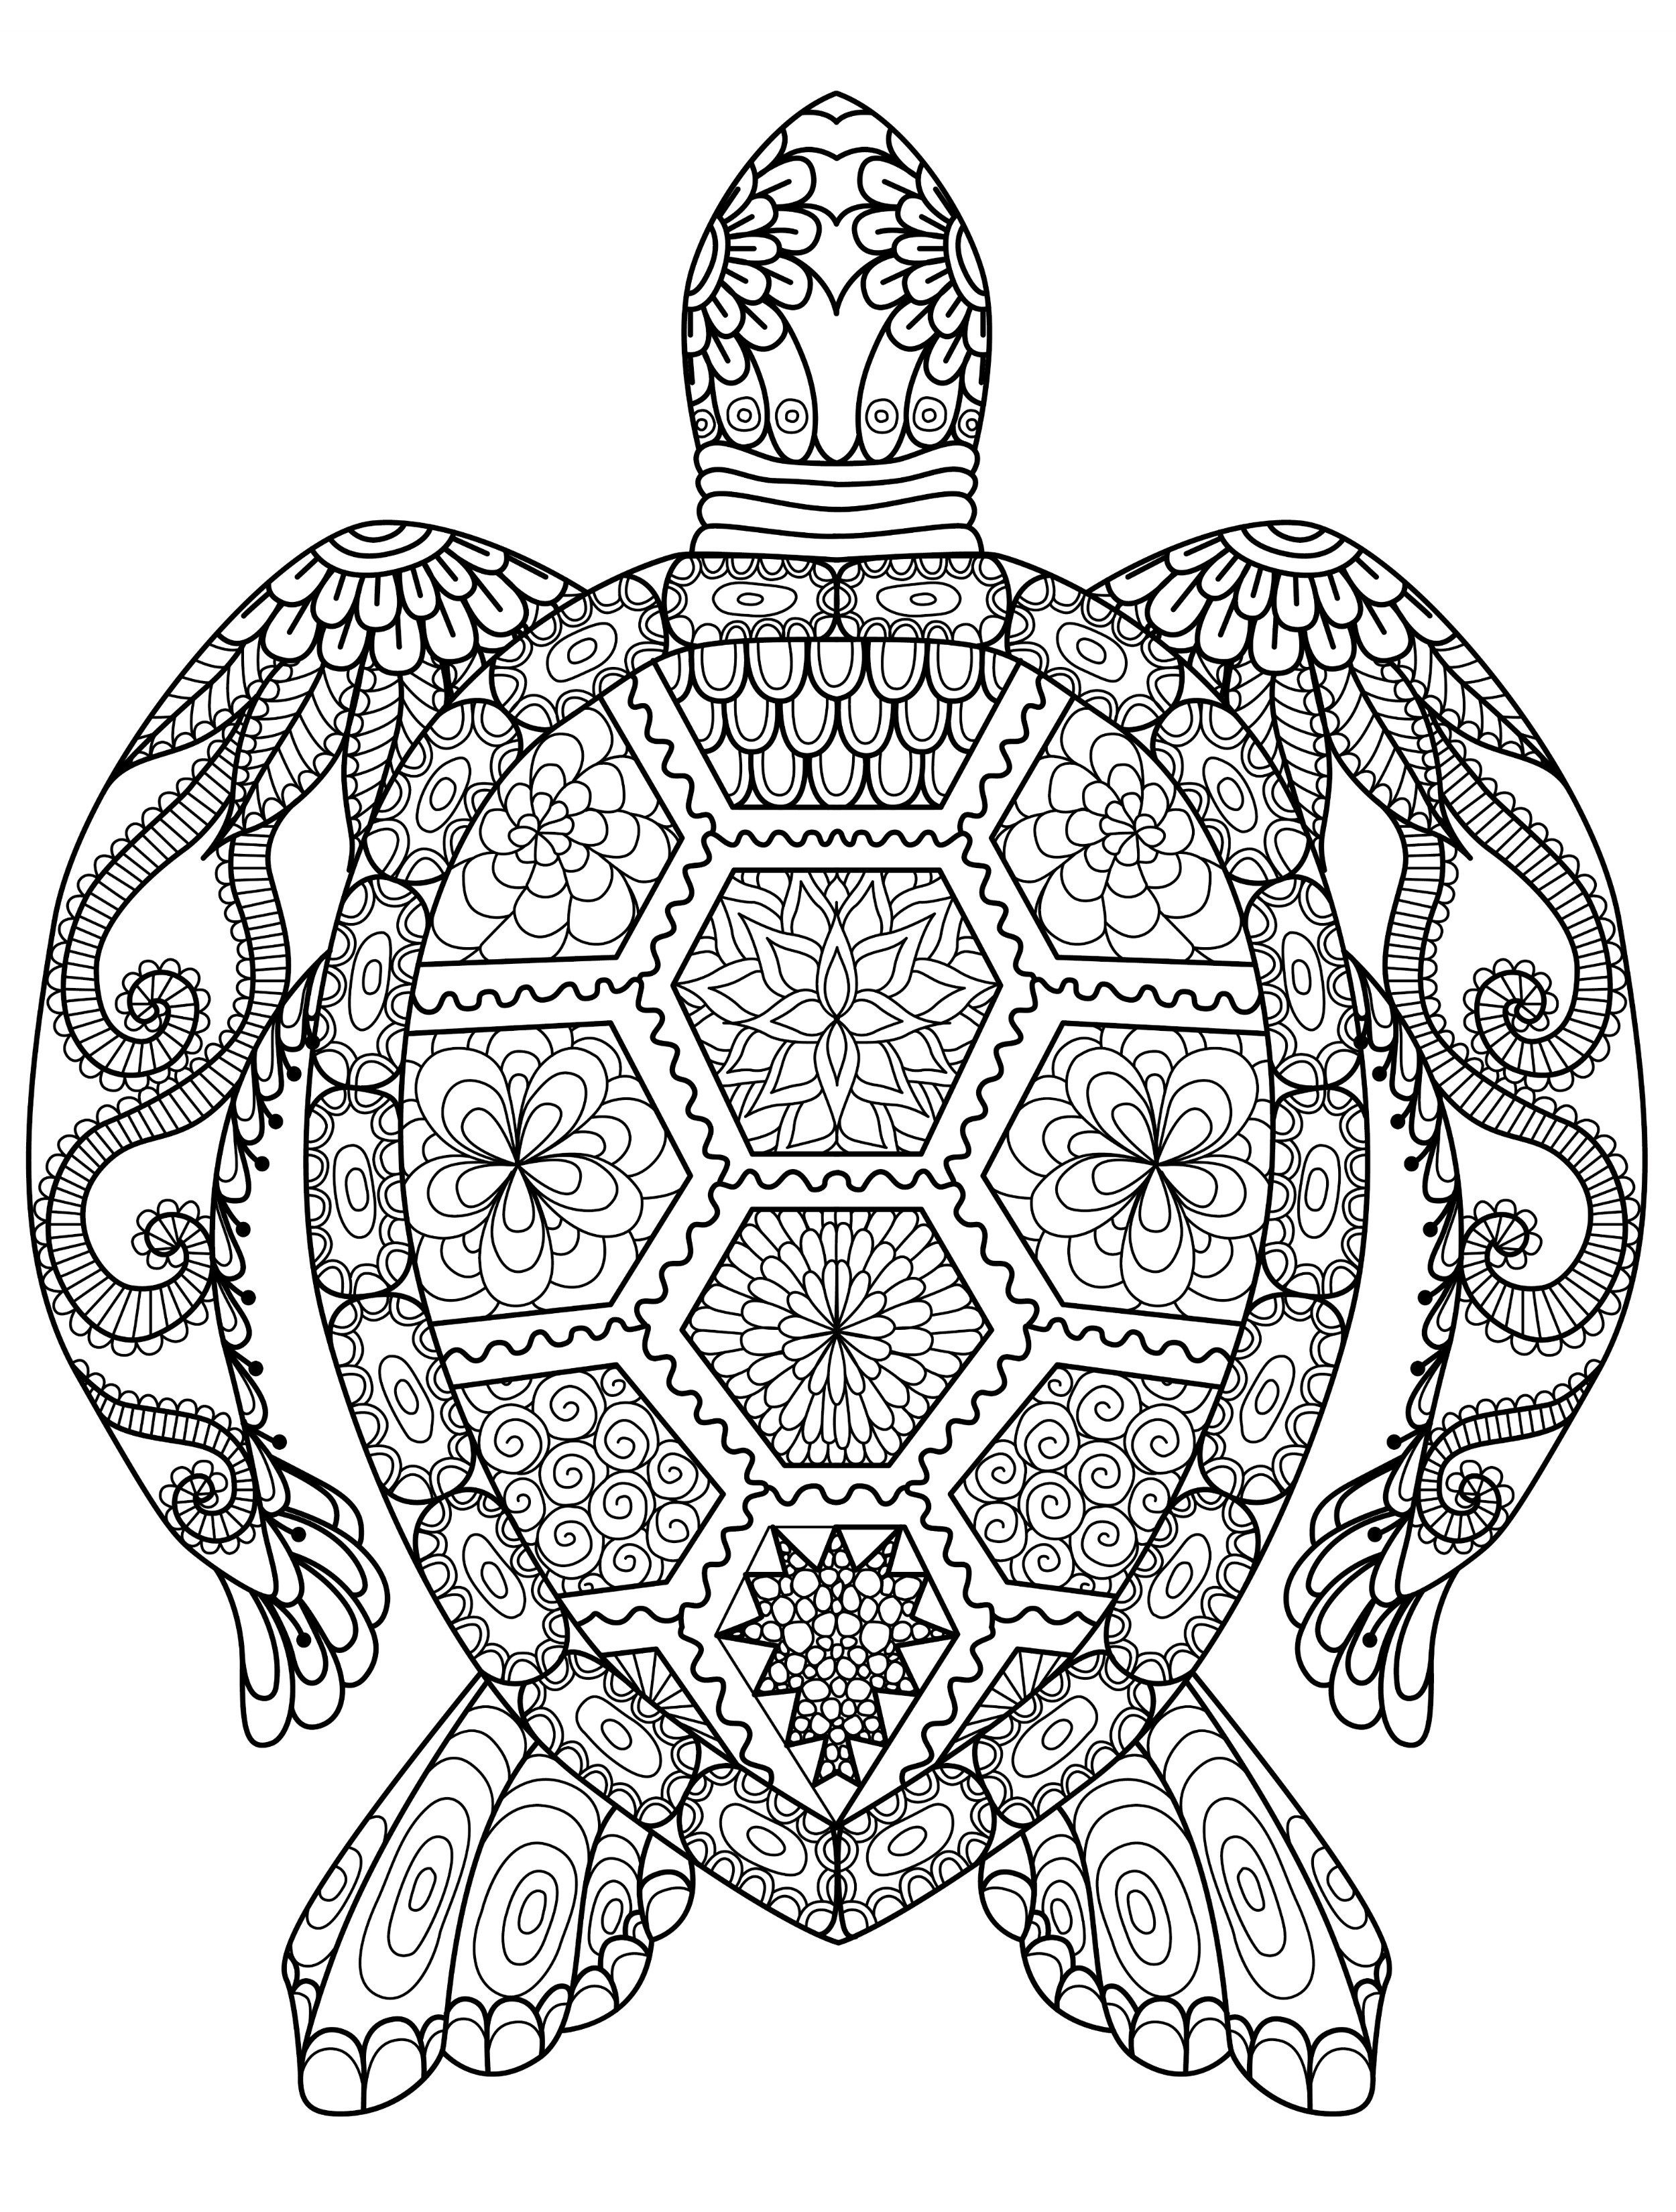 Coolest Coloring Books For Adults